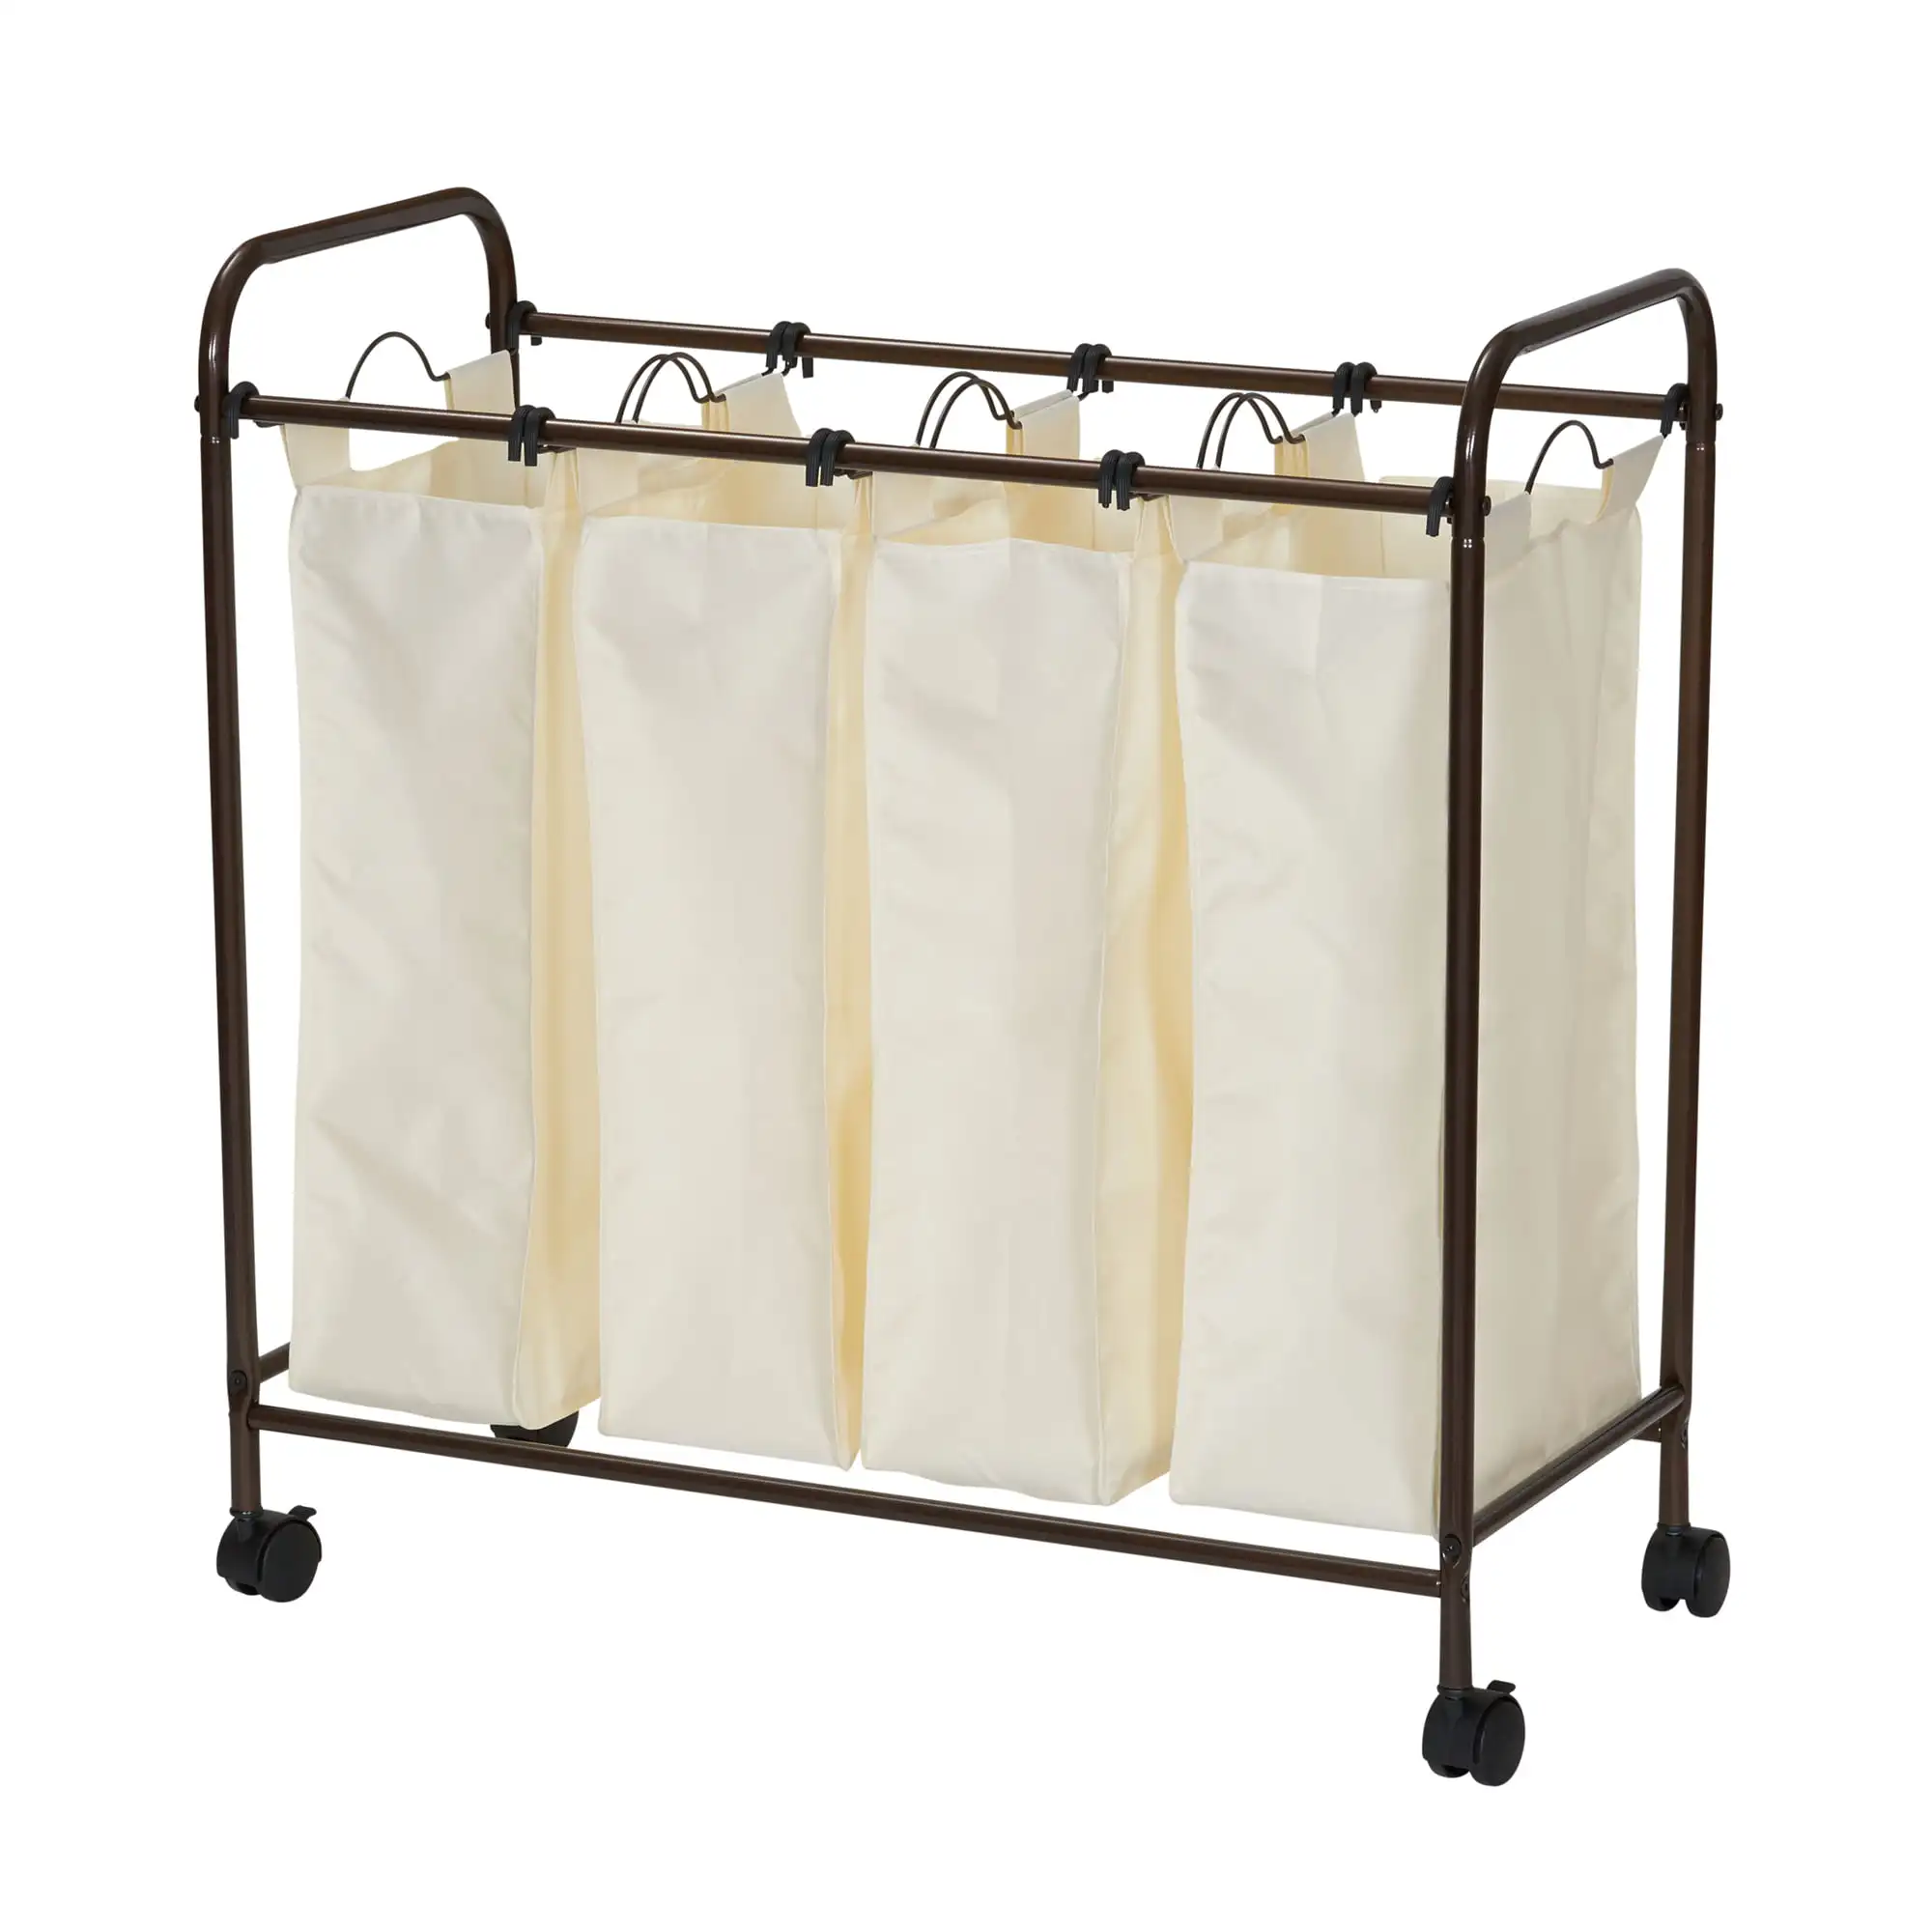 

Household Essentials Rolling Quad Sorter Laundry Hamper with Natural Polyester Bags, Antique Bronze